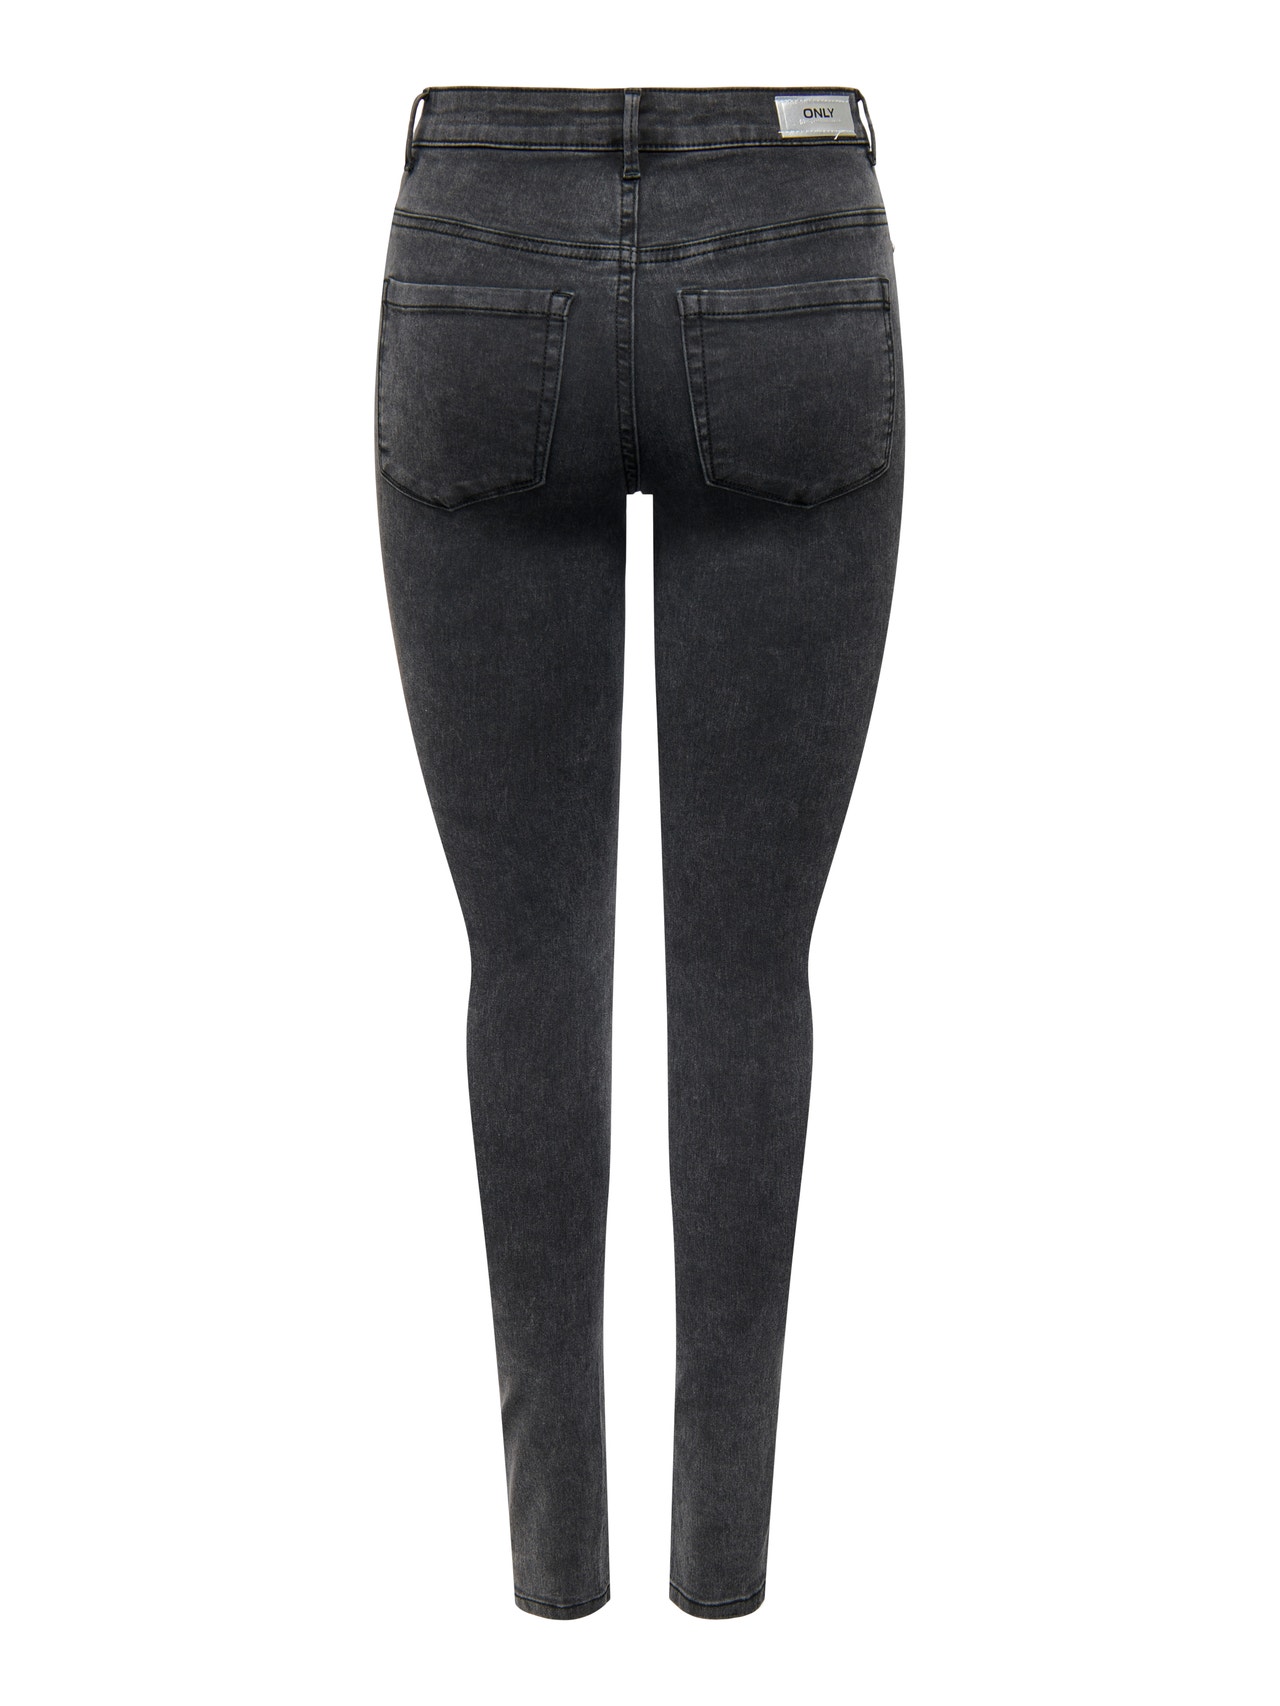 ONLY ONLROYAL TALL - À TAILLE HAUTE Jean skinny -Black Denim - 15262084